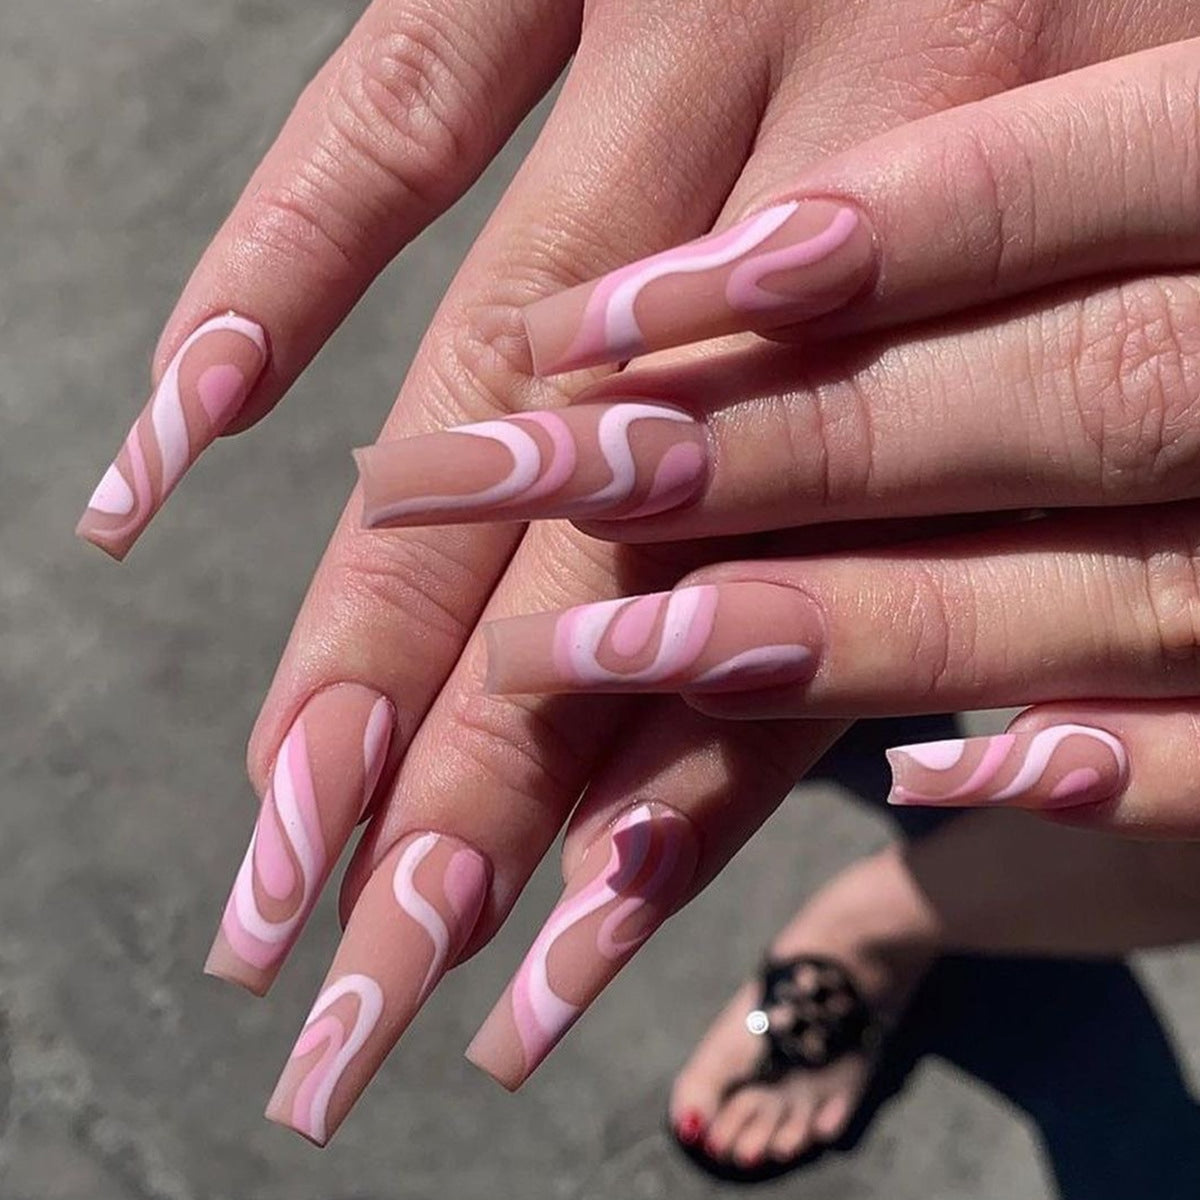 48 Most Beautiful Nail Designs to Inspire You – Pink and Plum nails